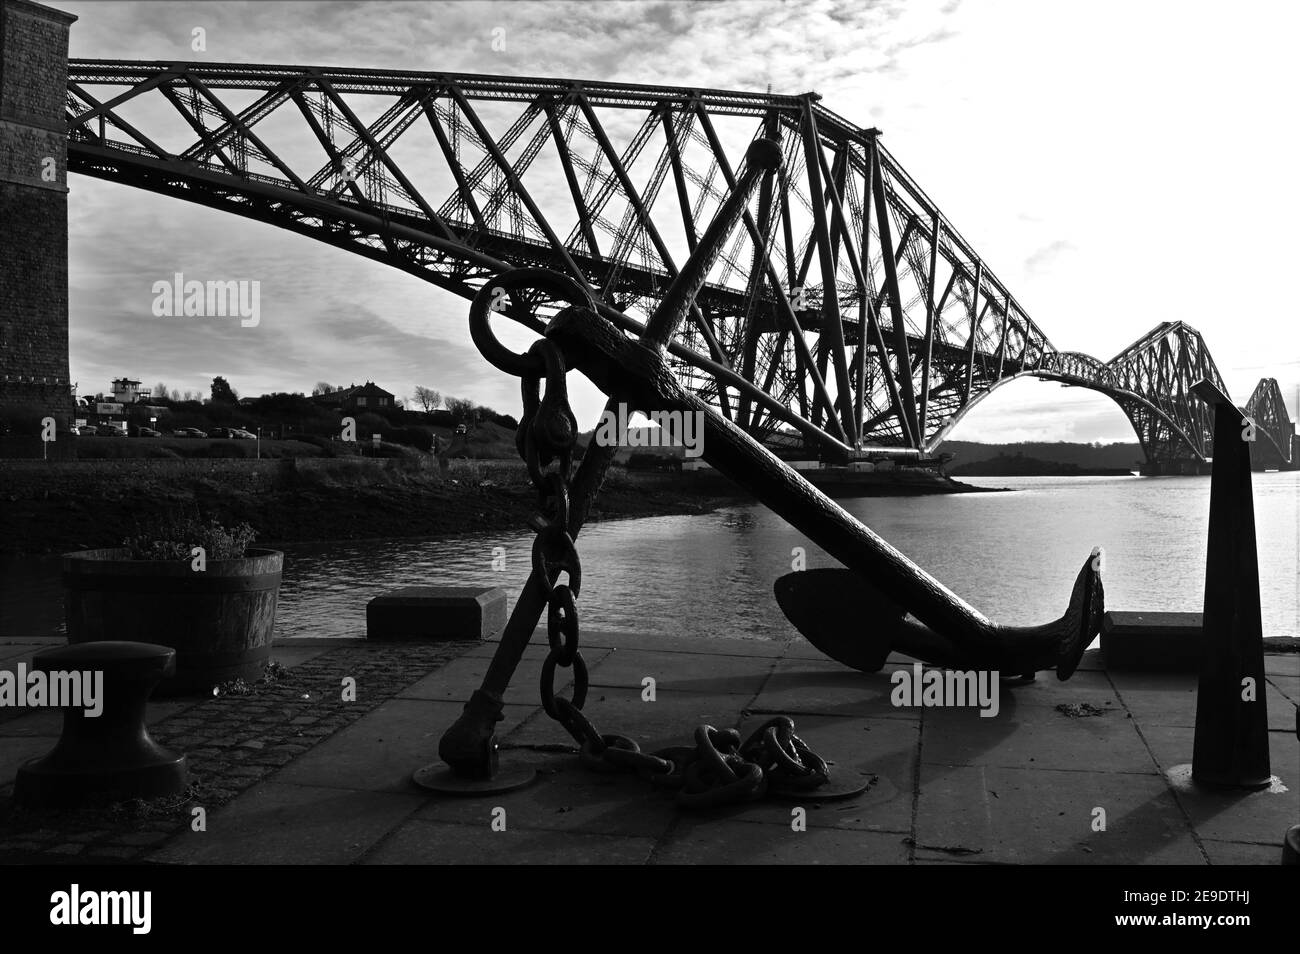 A view of the historic and iconic Forth rail bridge which spans the Forth Estuary in Scotland. Stock Photo